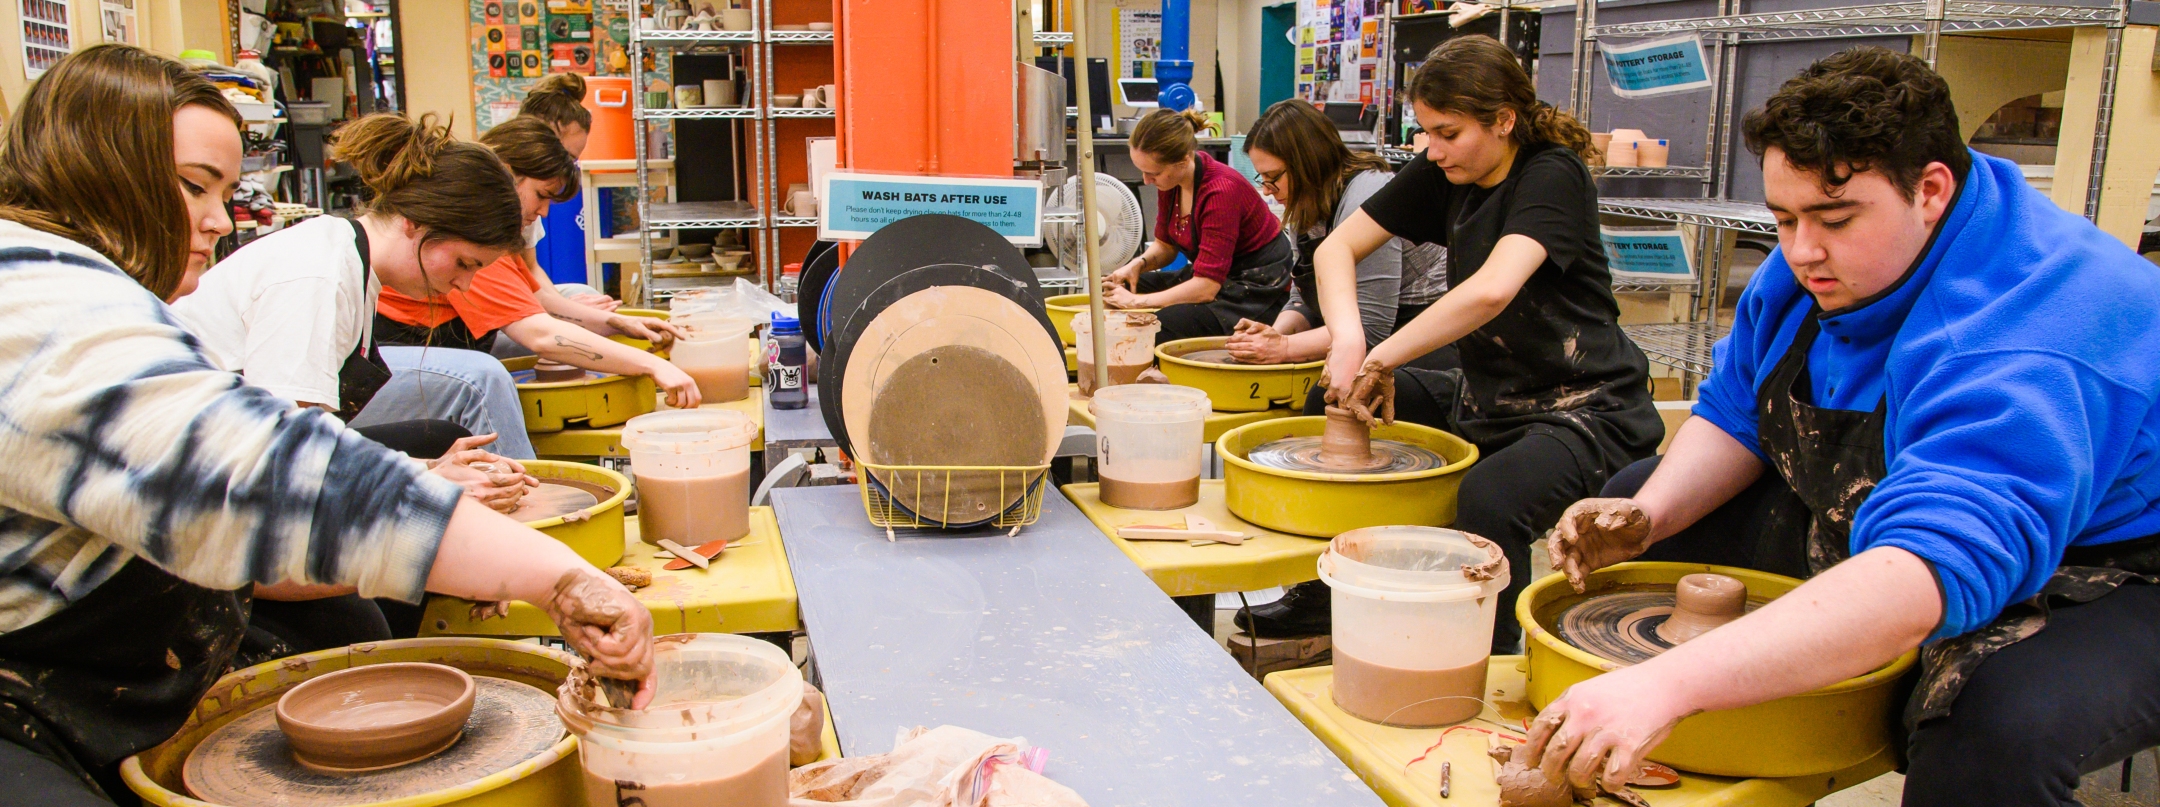 students working at row of pottery wheels in the workspace